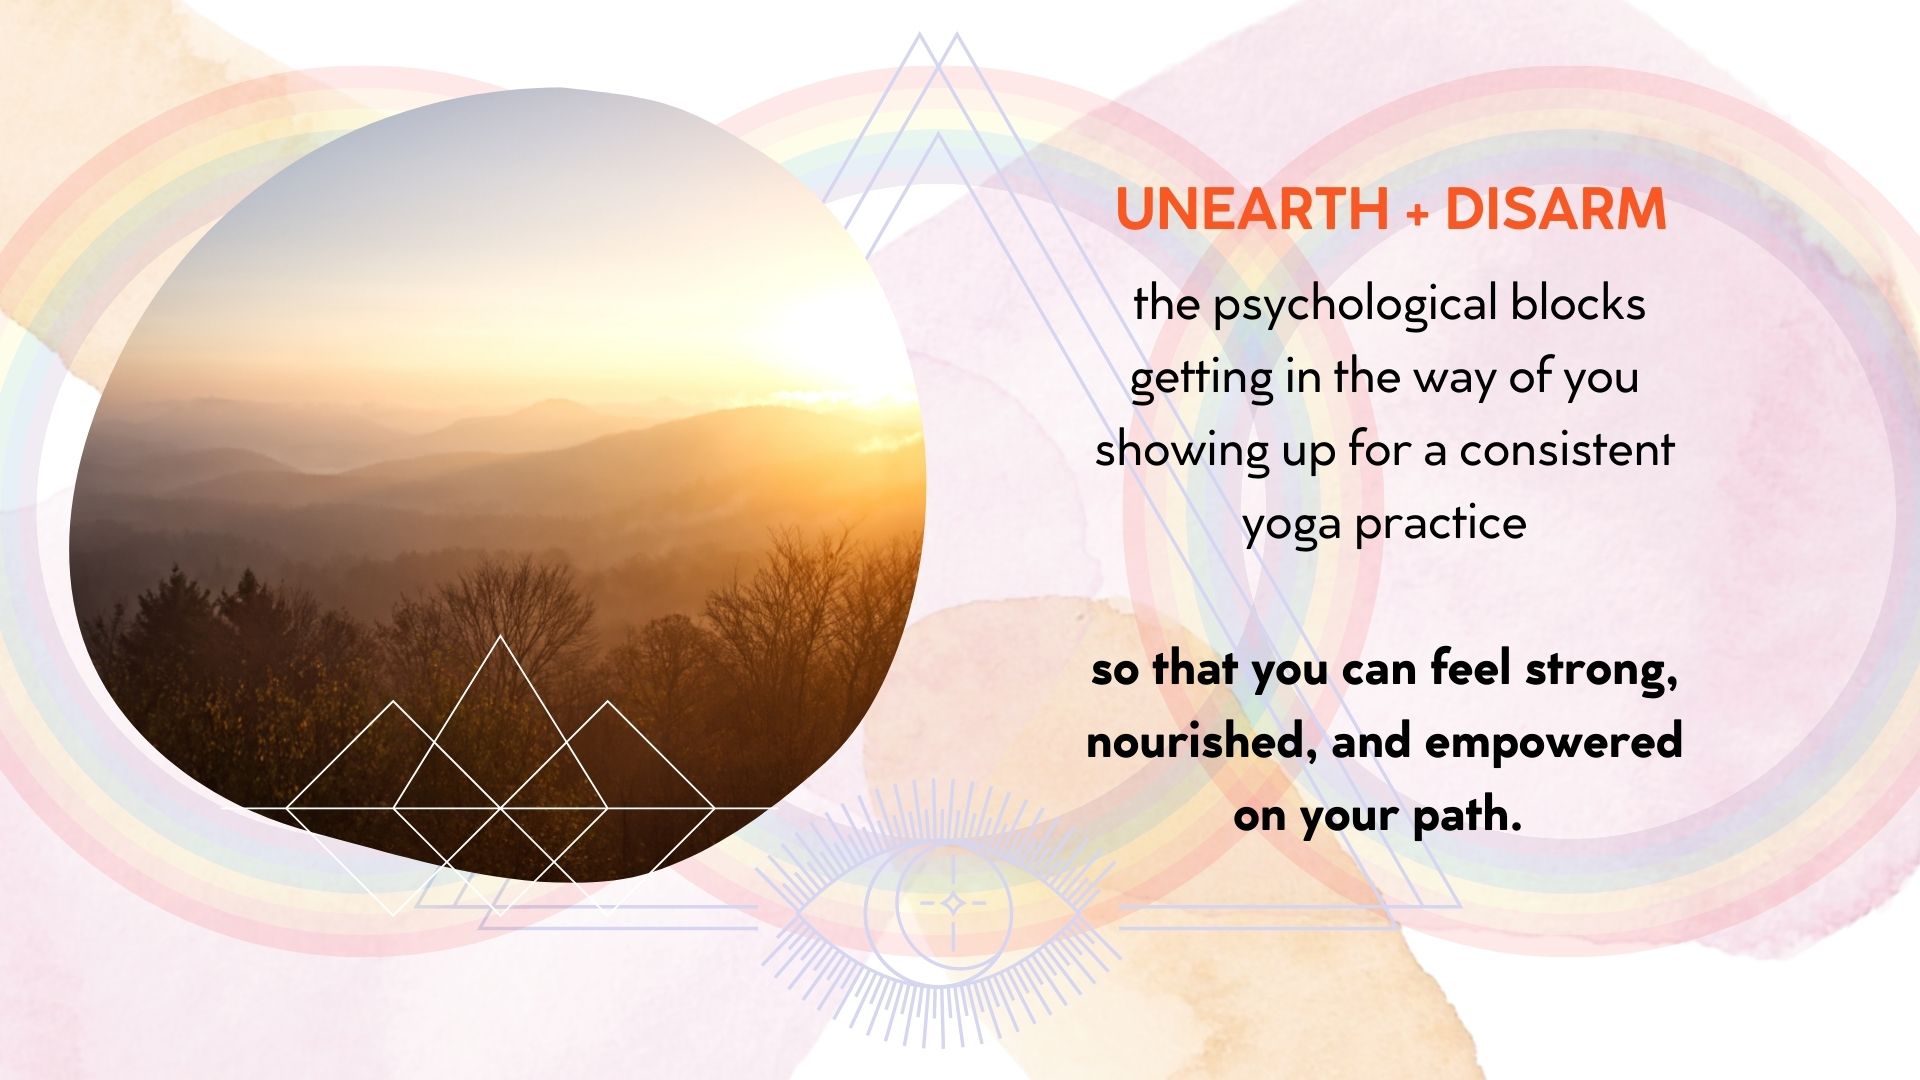 Unearth and disarm the psychological blocks getting in the way of you showing up for a consistent yoga practice so that you can feel strong, nourished, and empowered on your path.